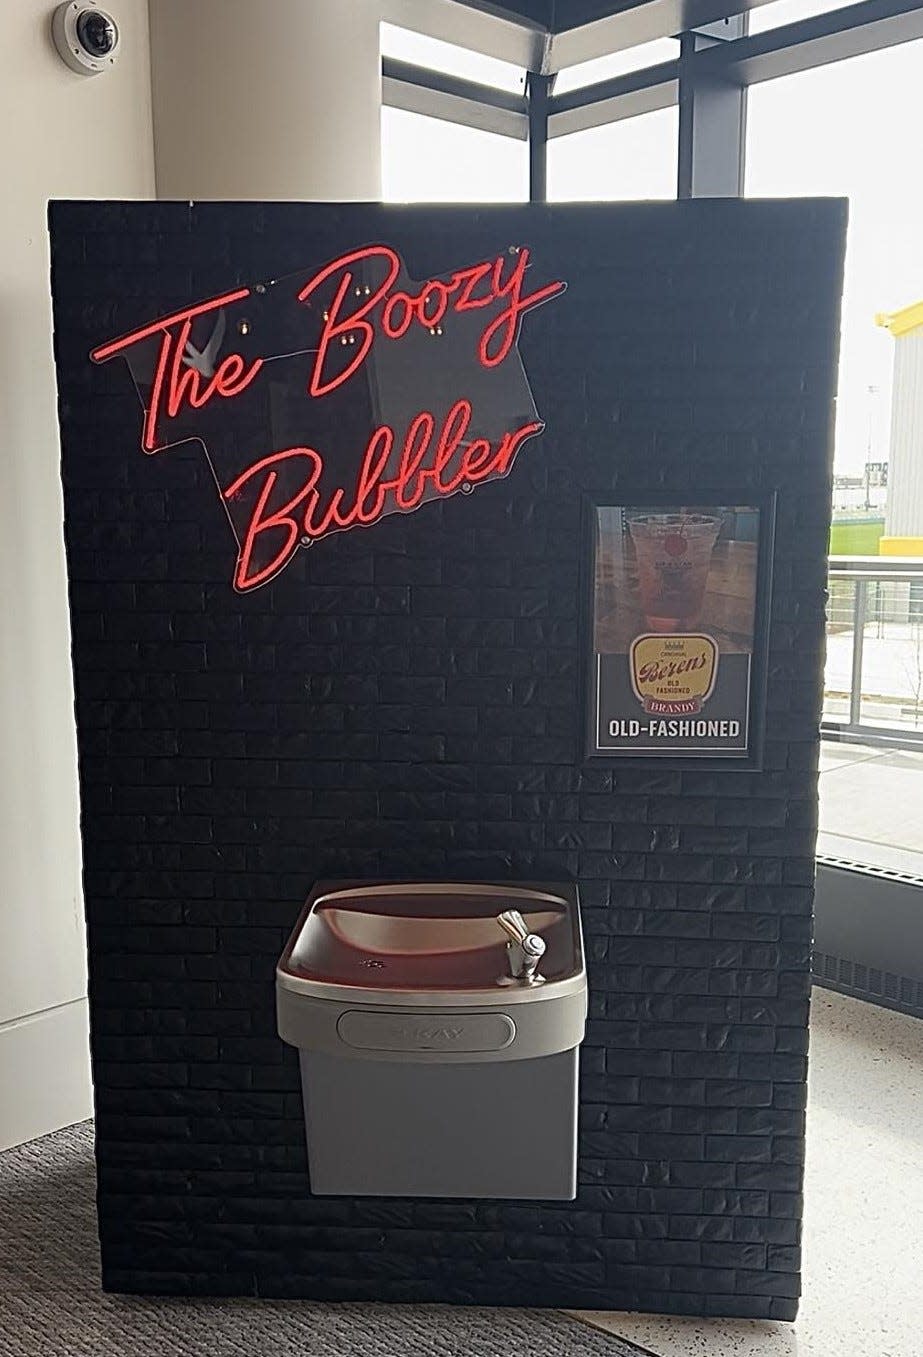 PMI Entertainment Group debuted its new Boozy Bubbler for Charlie Berens' sold-out performance at the Resch Center in April. The modified Wisconsin bubbler, on wheels, will serve up specialty drinks for concerts and other major events at the arena.